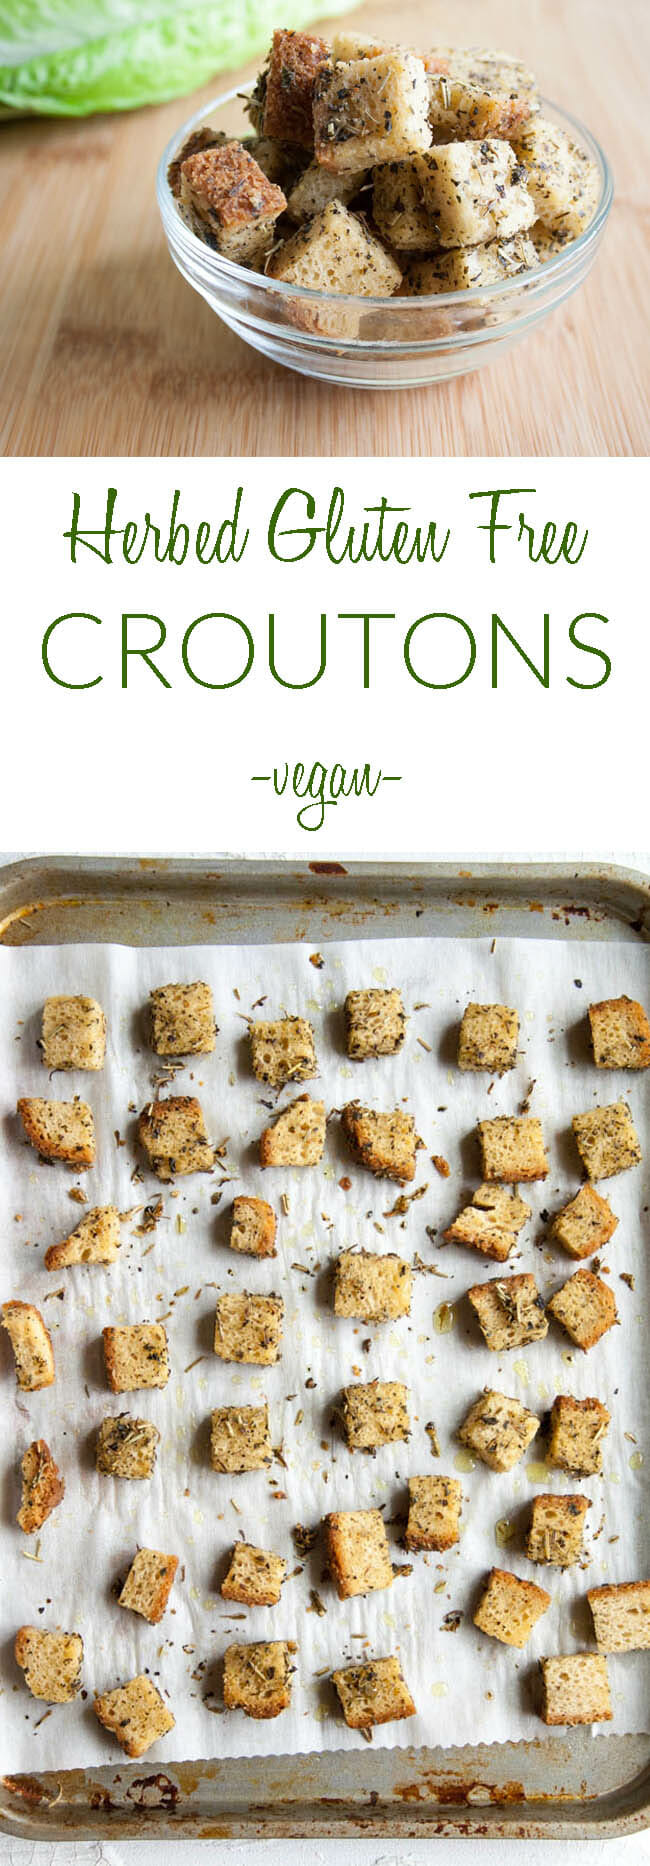 Herbed Gluten Free Croutons collage photo with text.